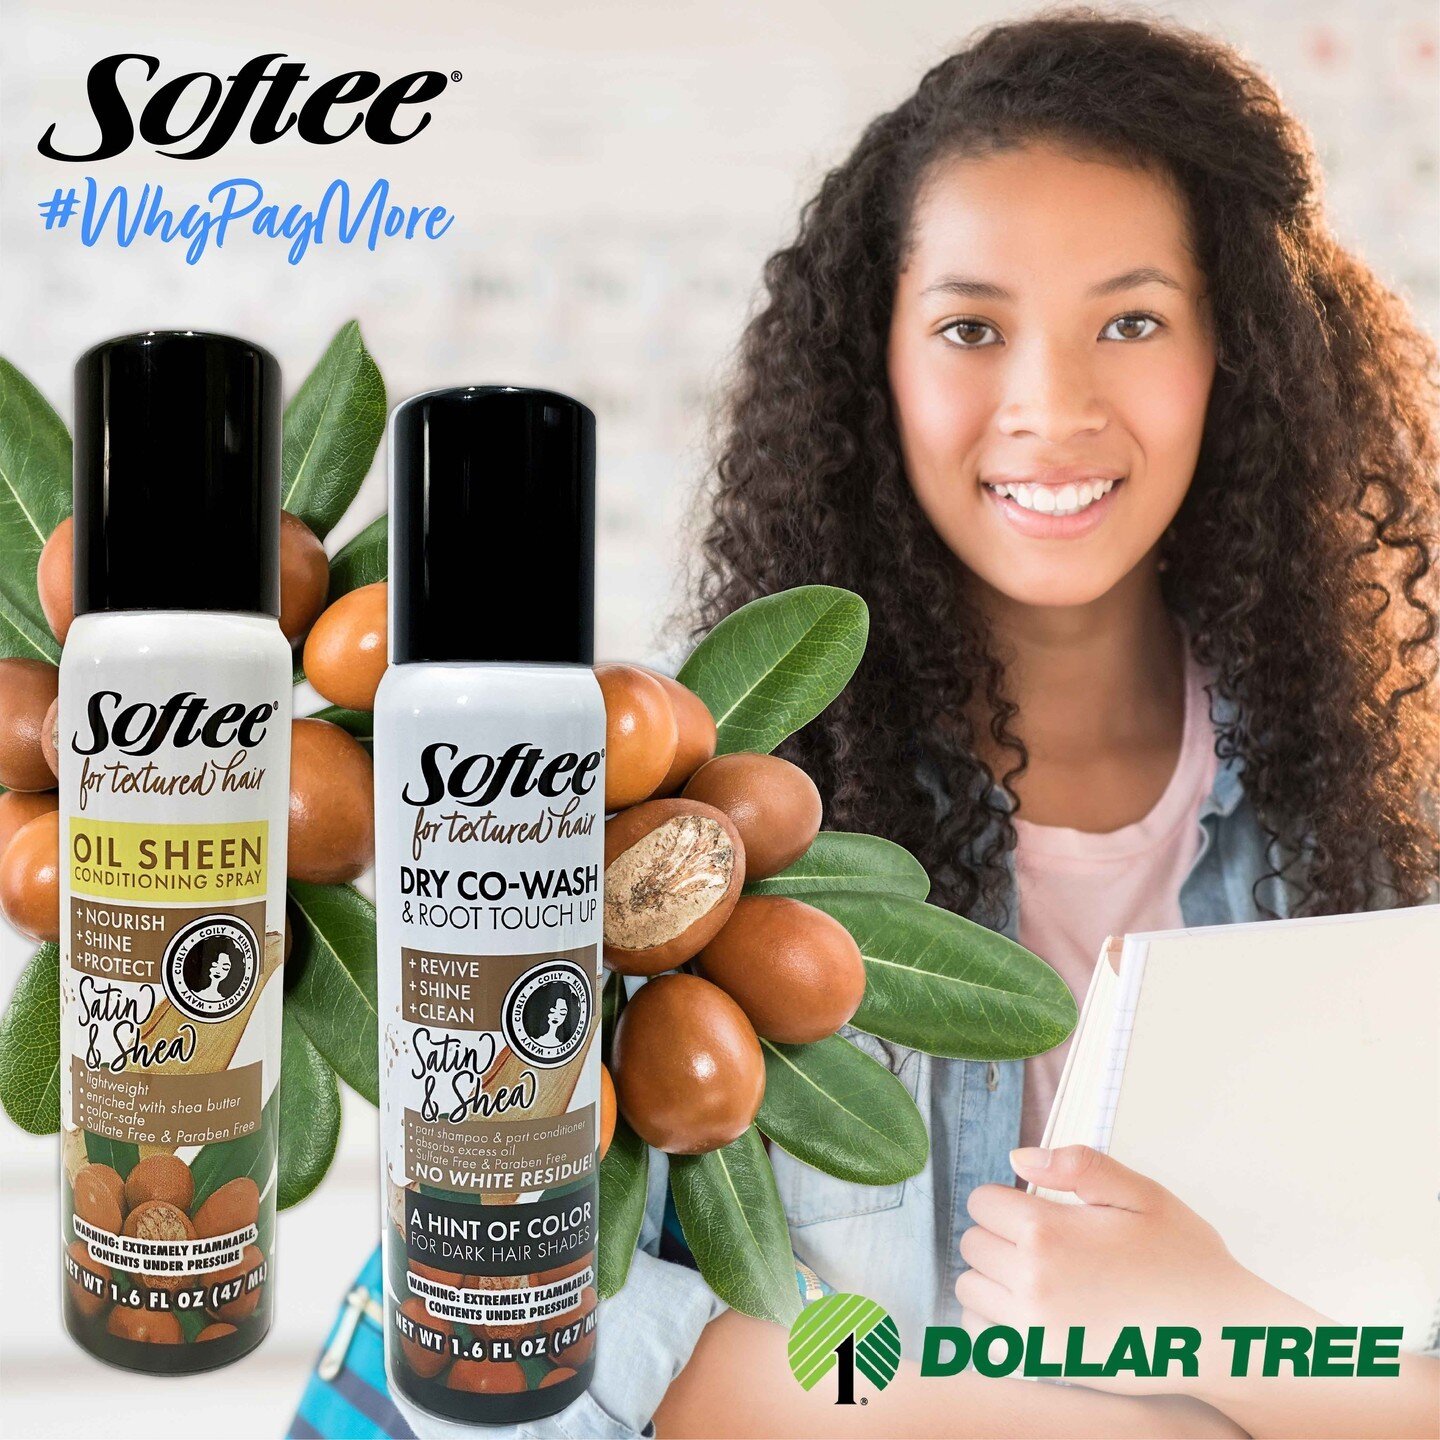 Find your favorite Softee Products and fall in love with keeping those curls clean + nourished + protected + and full of shine!  Softee Oil Sheen and Dry Co-Wash w/Root Touch Up are blended with Shea Oils that LEAVE NO WHITE RESIDUE!  Why pay more fo